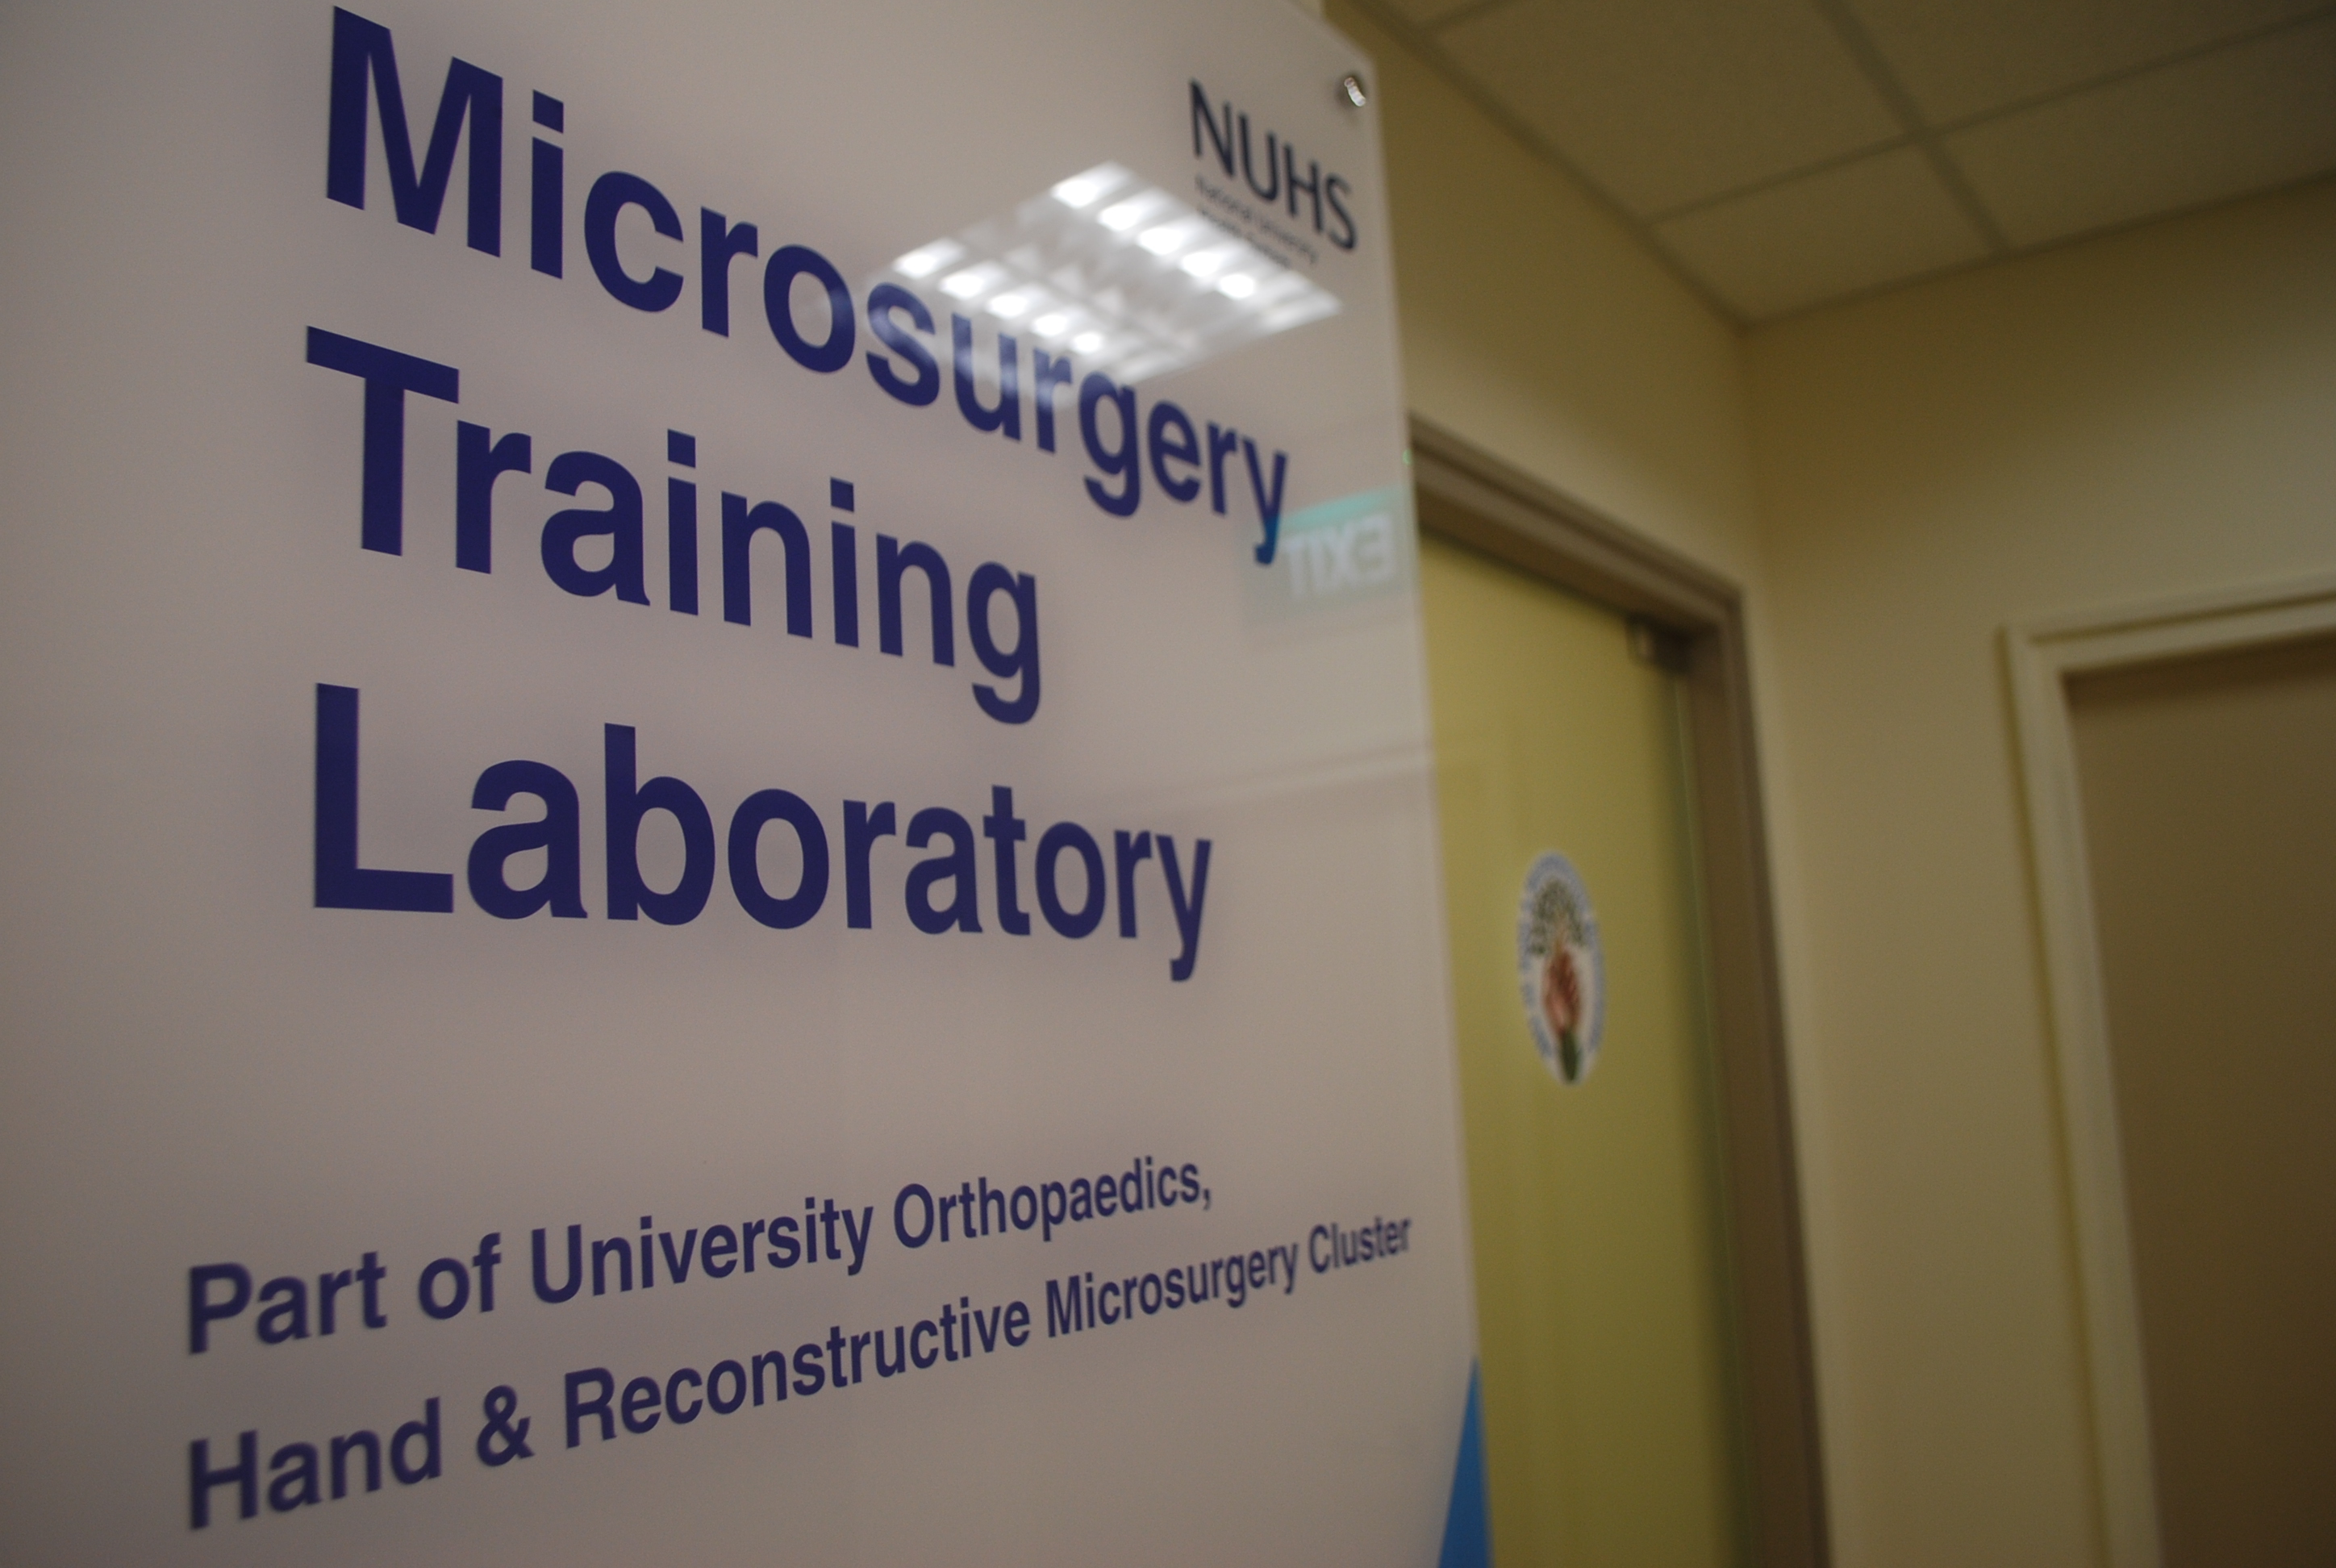 Our Microsurgery Training Courses